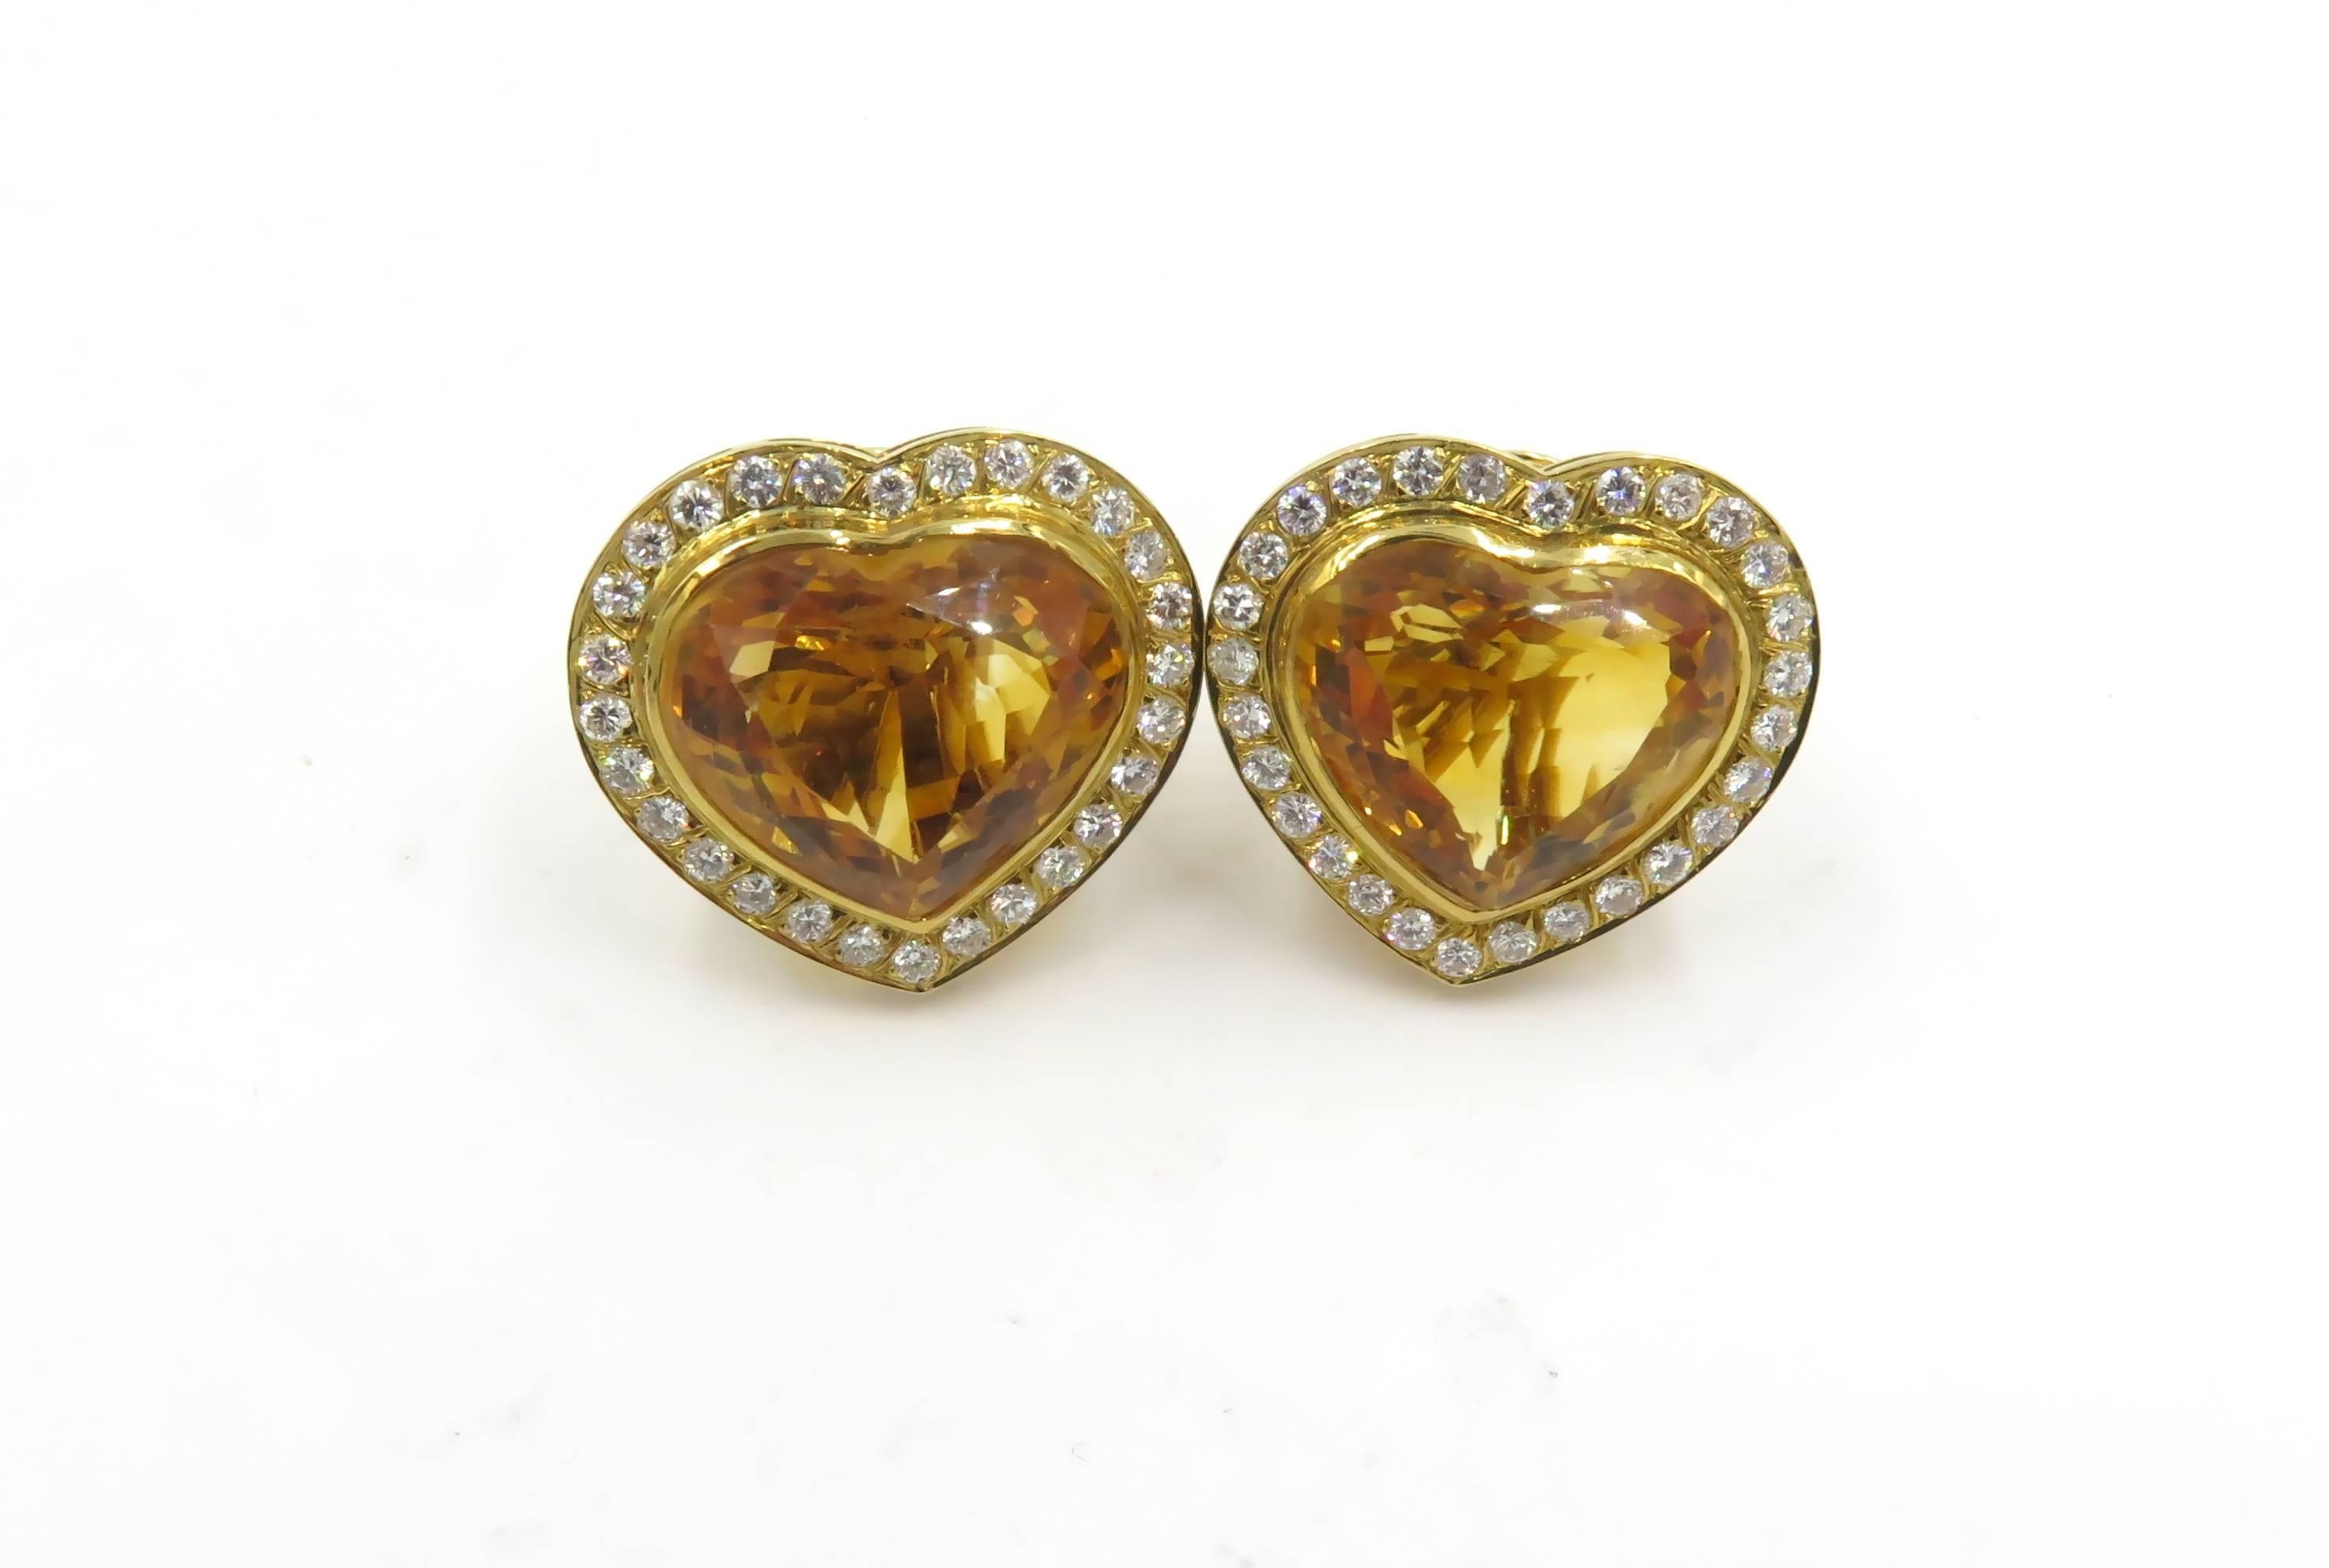 A pair of 18 karat yellow gold, citrine and diamond earrings. Circa 1980. Each set with a heart shaped citrine, each measuring approximately 17.50 x 20.10 x 10.15mm, and weighing approximately 18.45 carats, within a circular cut diamond surround.